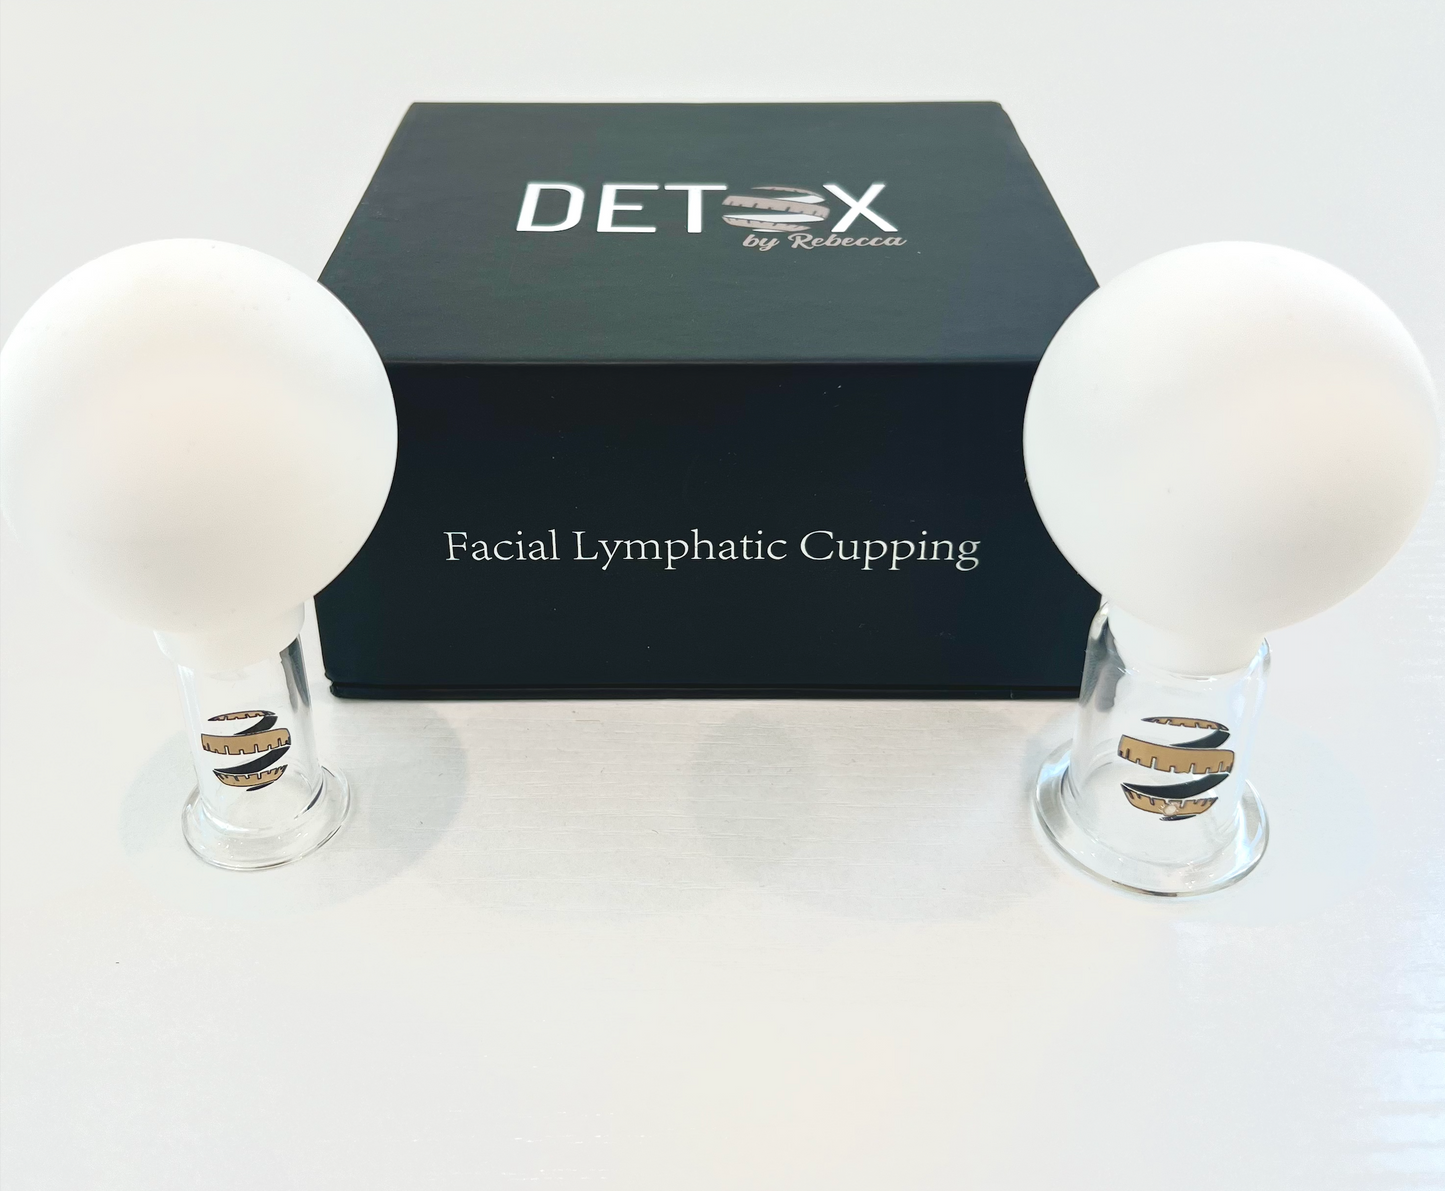 Facial Lymphatic Cupping